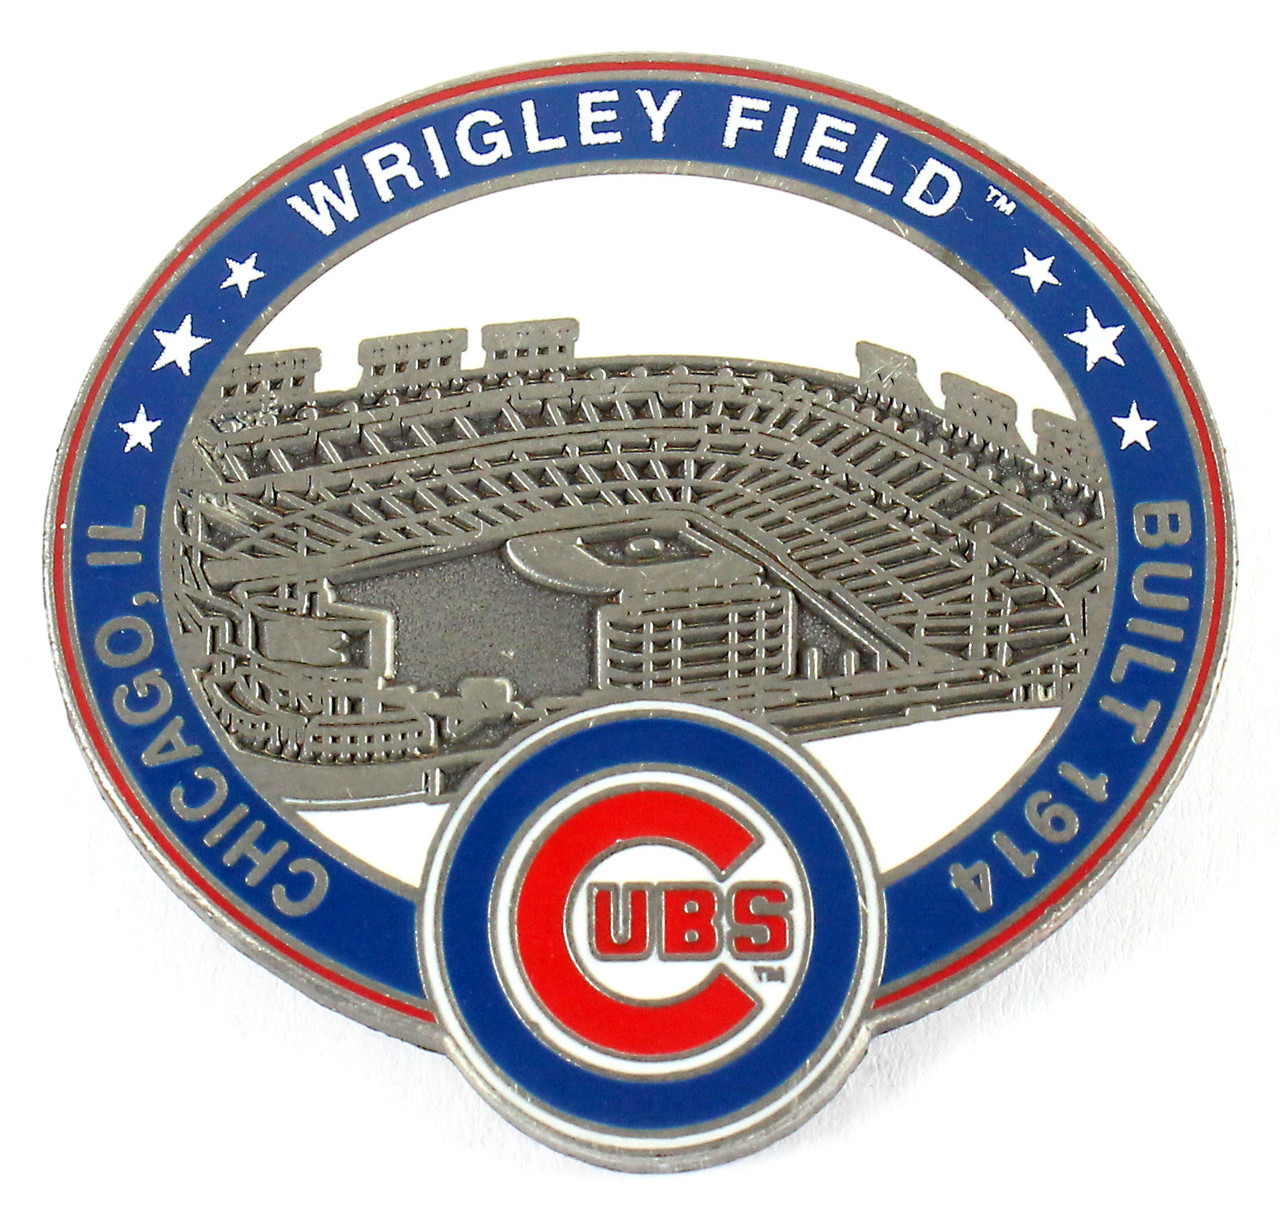 1907 Chicago Cubs MLB World Series Championship Jersey Patch